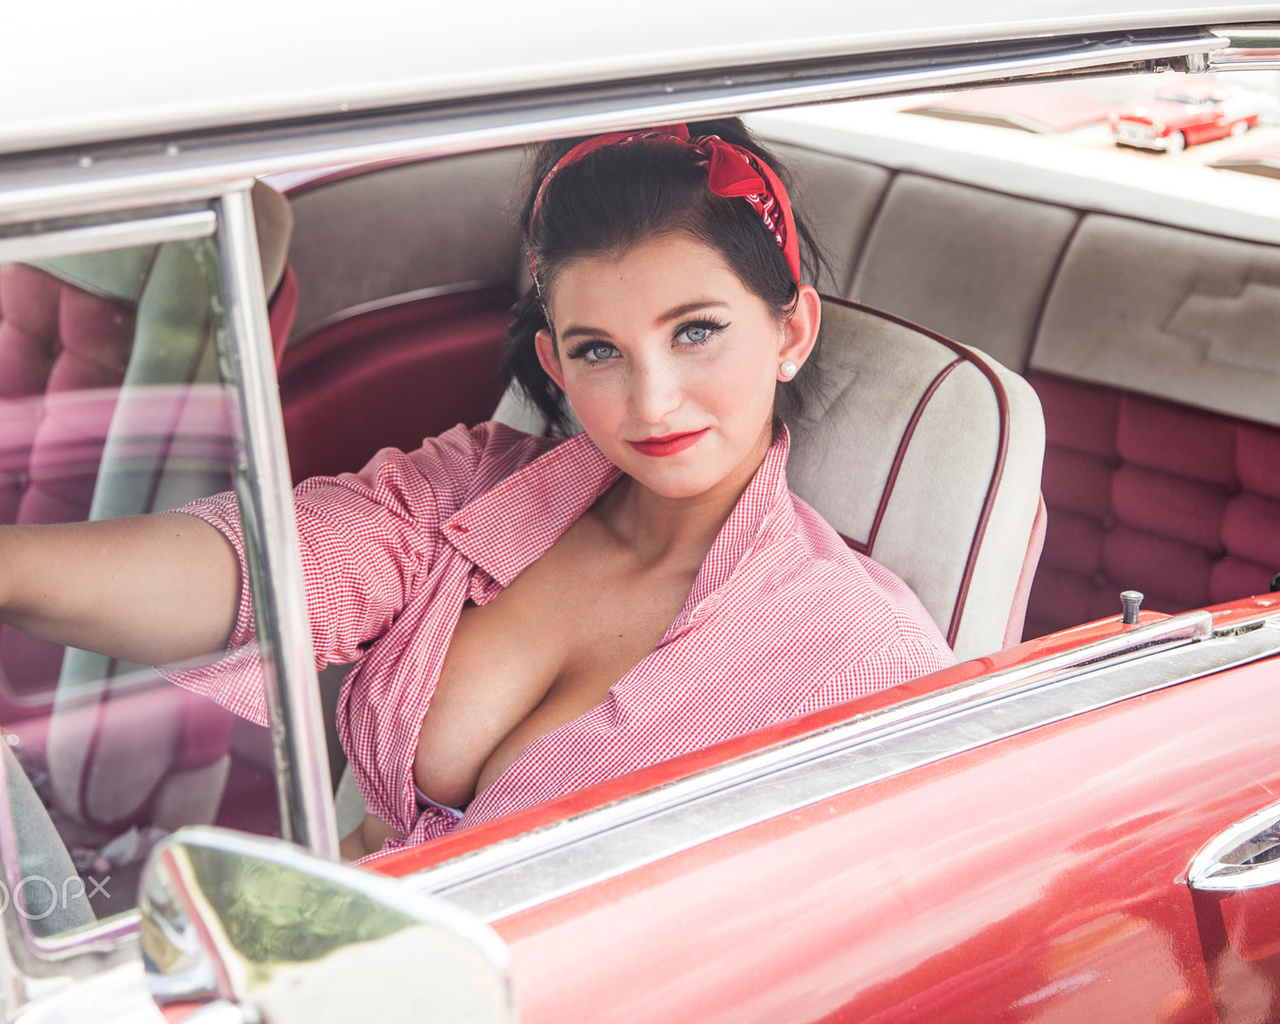 women, with cars, jeff cain, 500px, model, pinup models, 